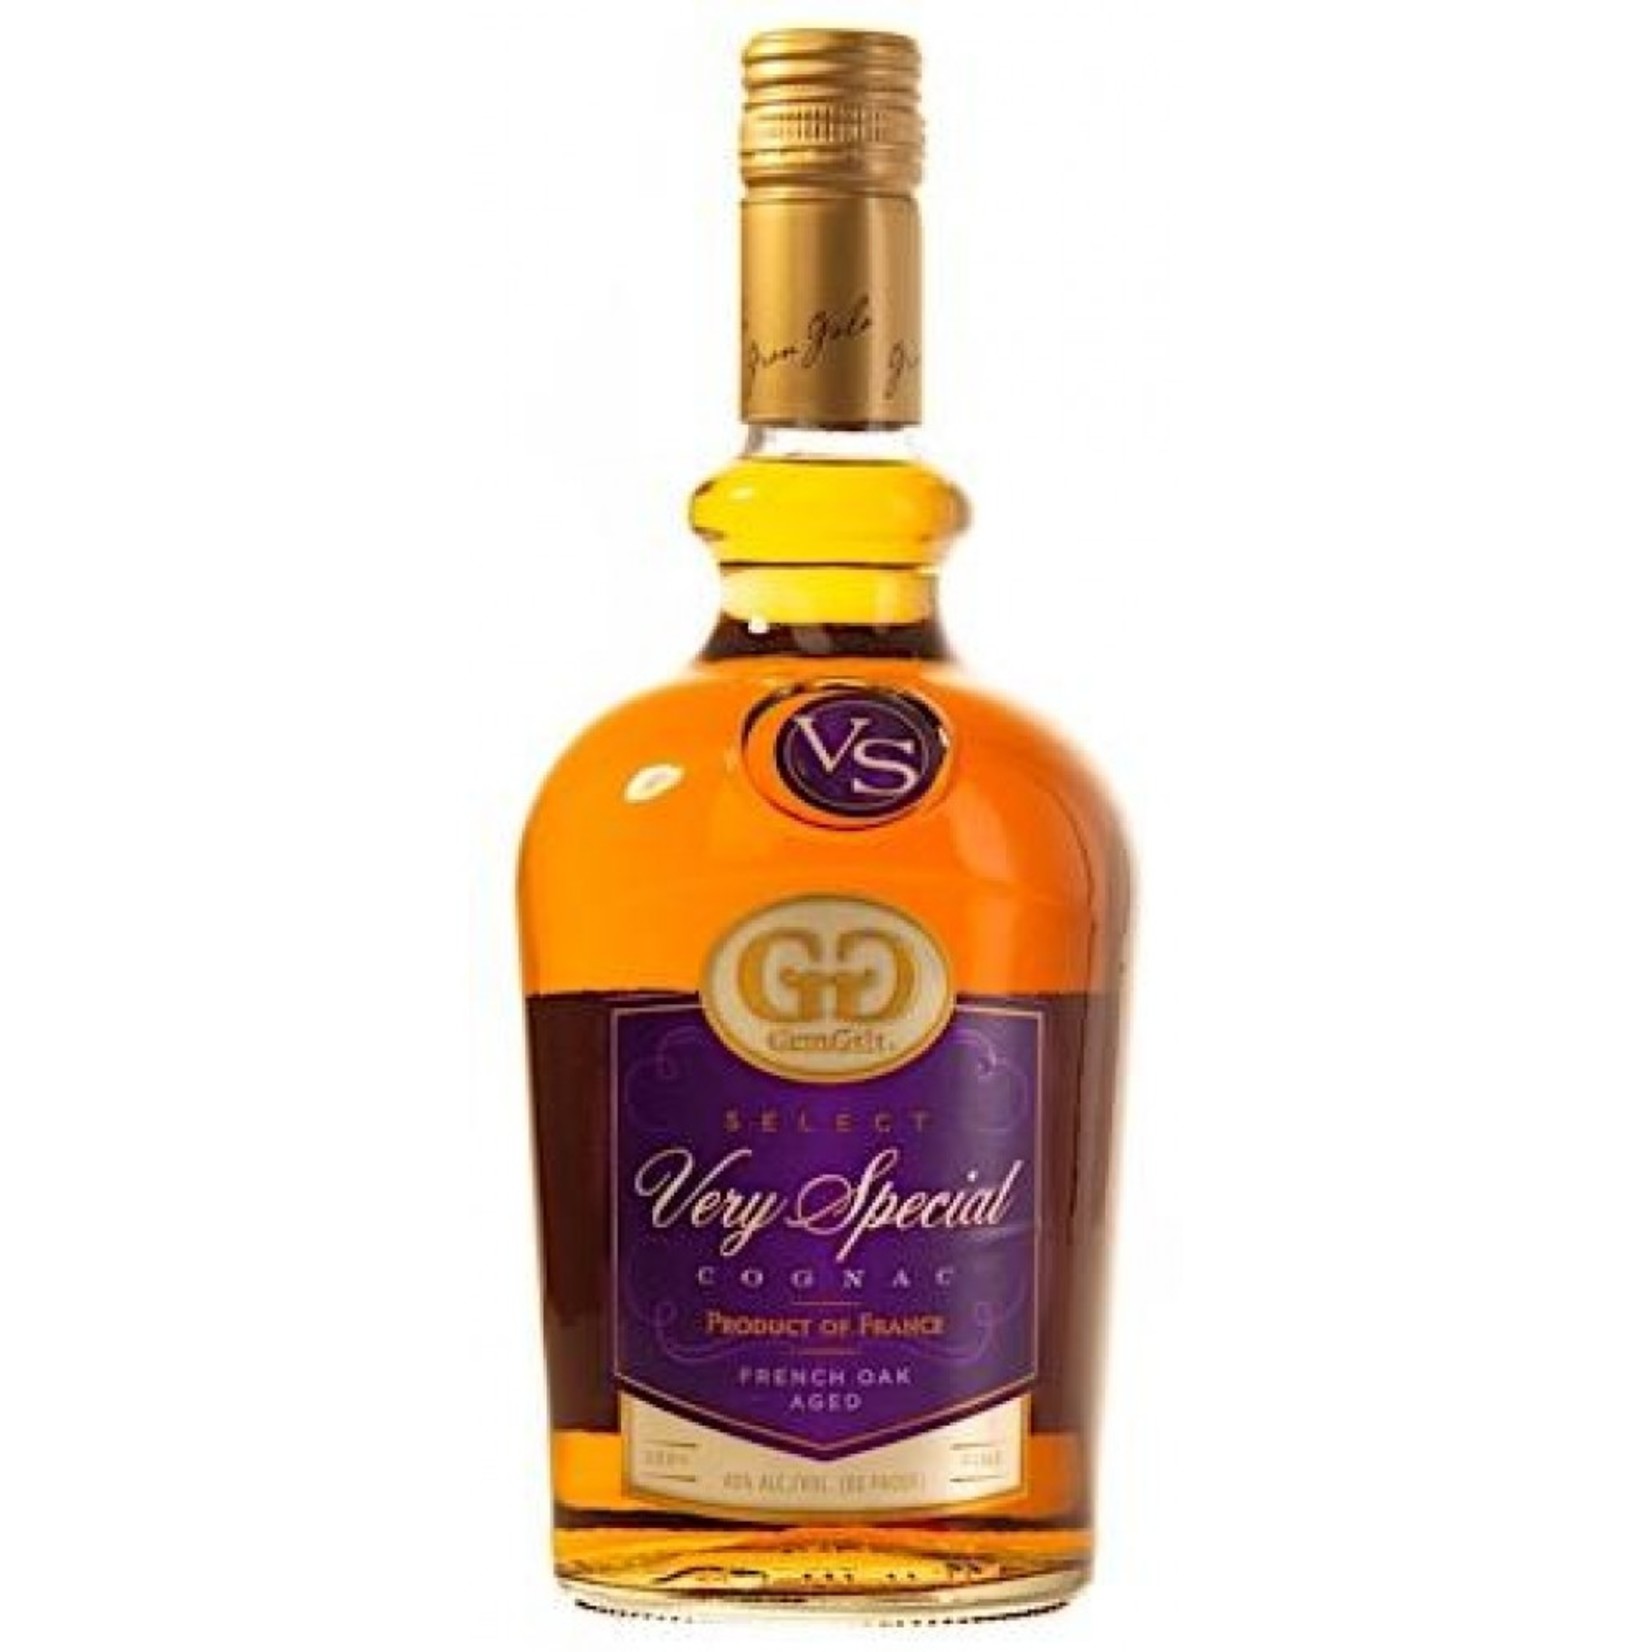 Gran Gala Very Special V.S. Cognac, France  prices, stores, product  reviews & market trends